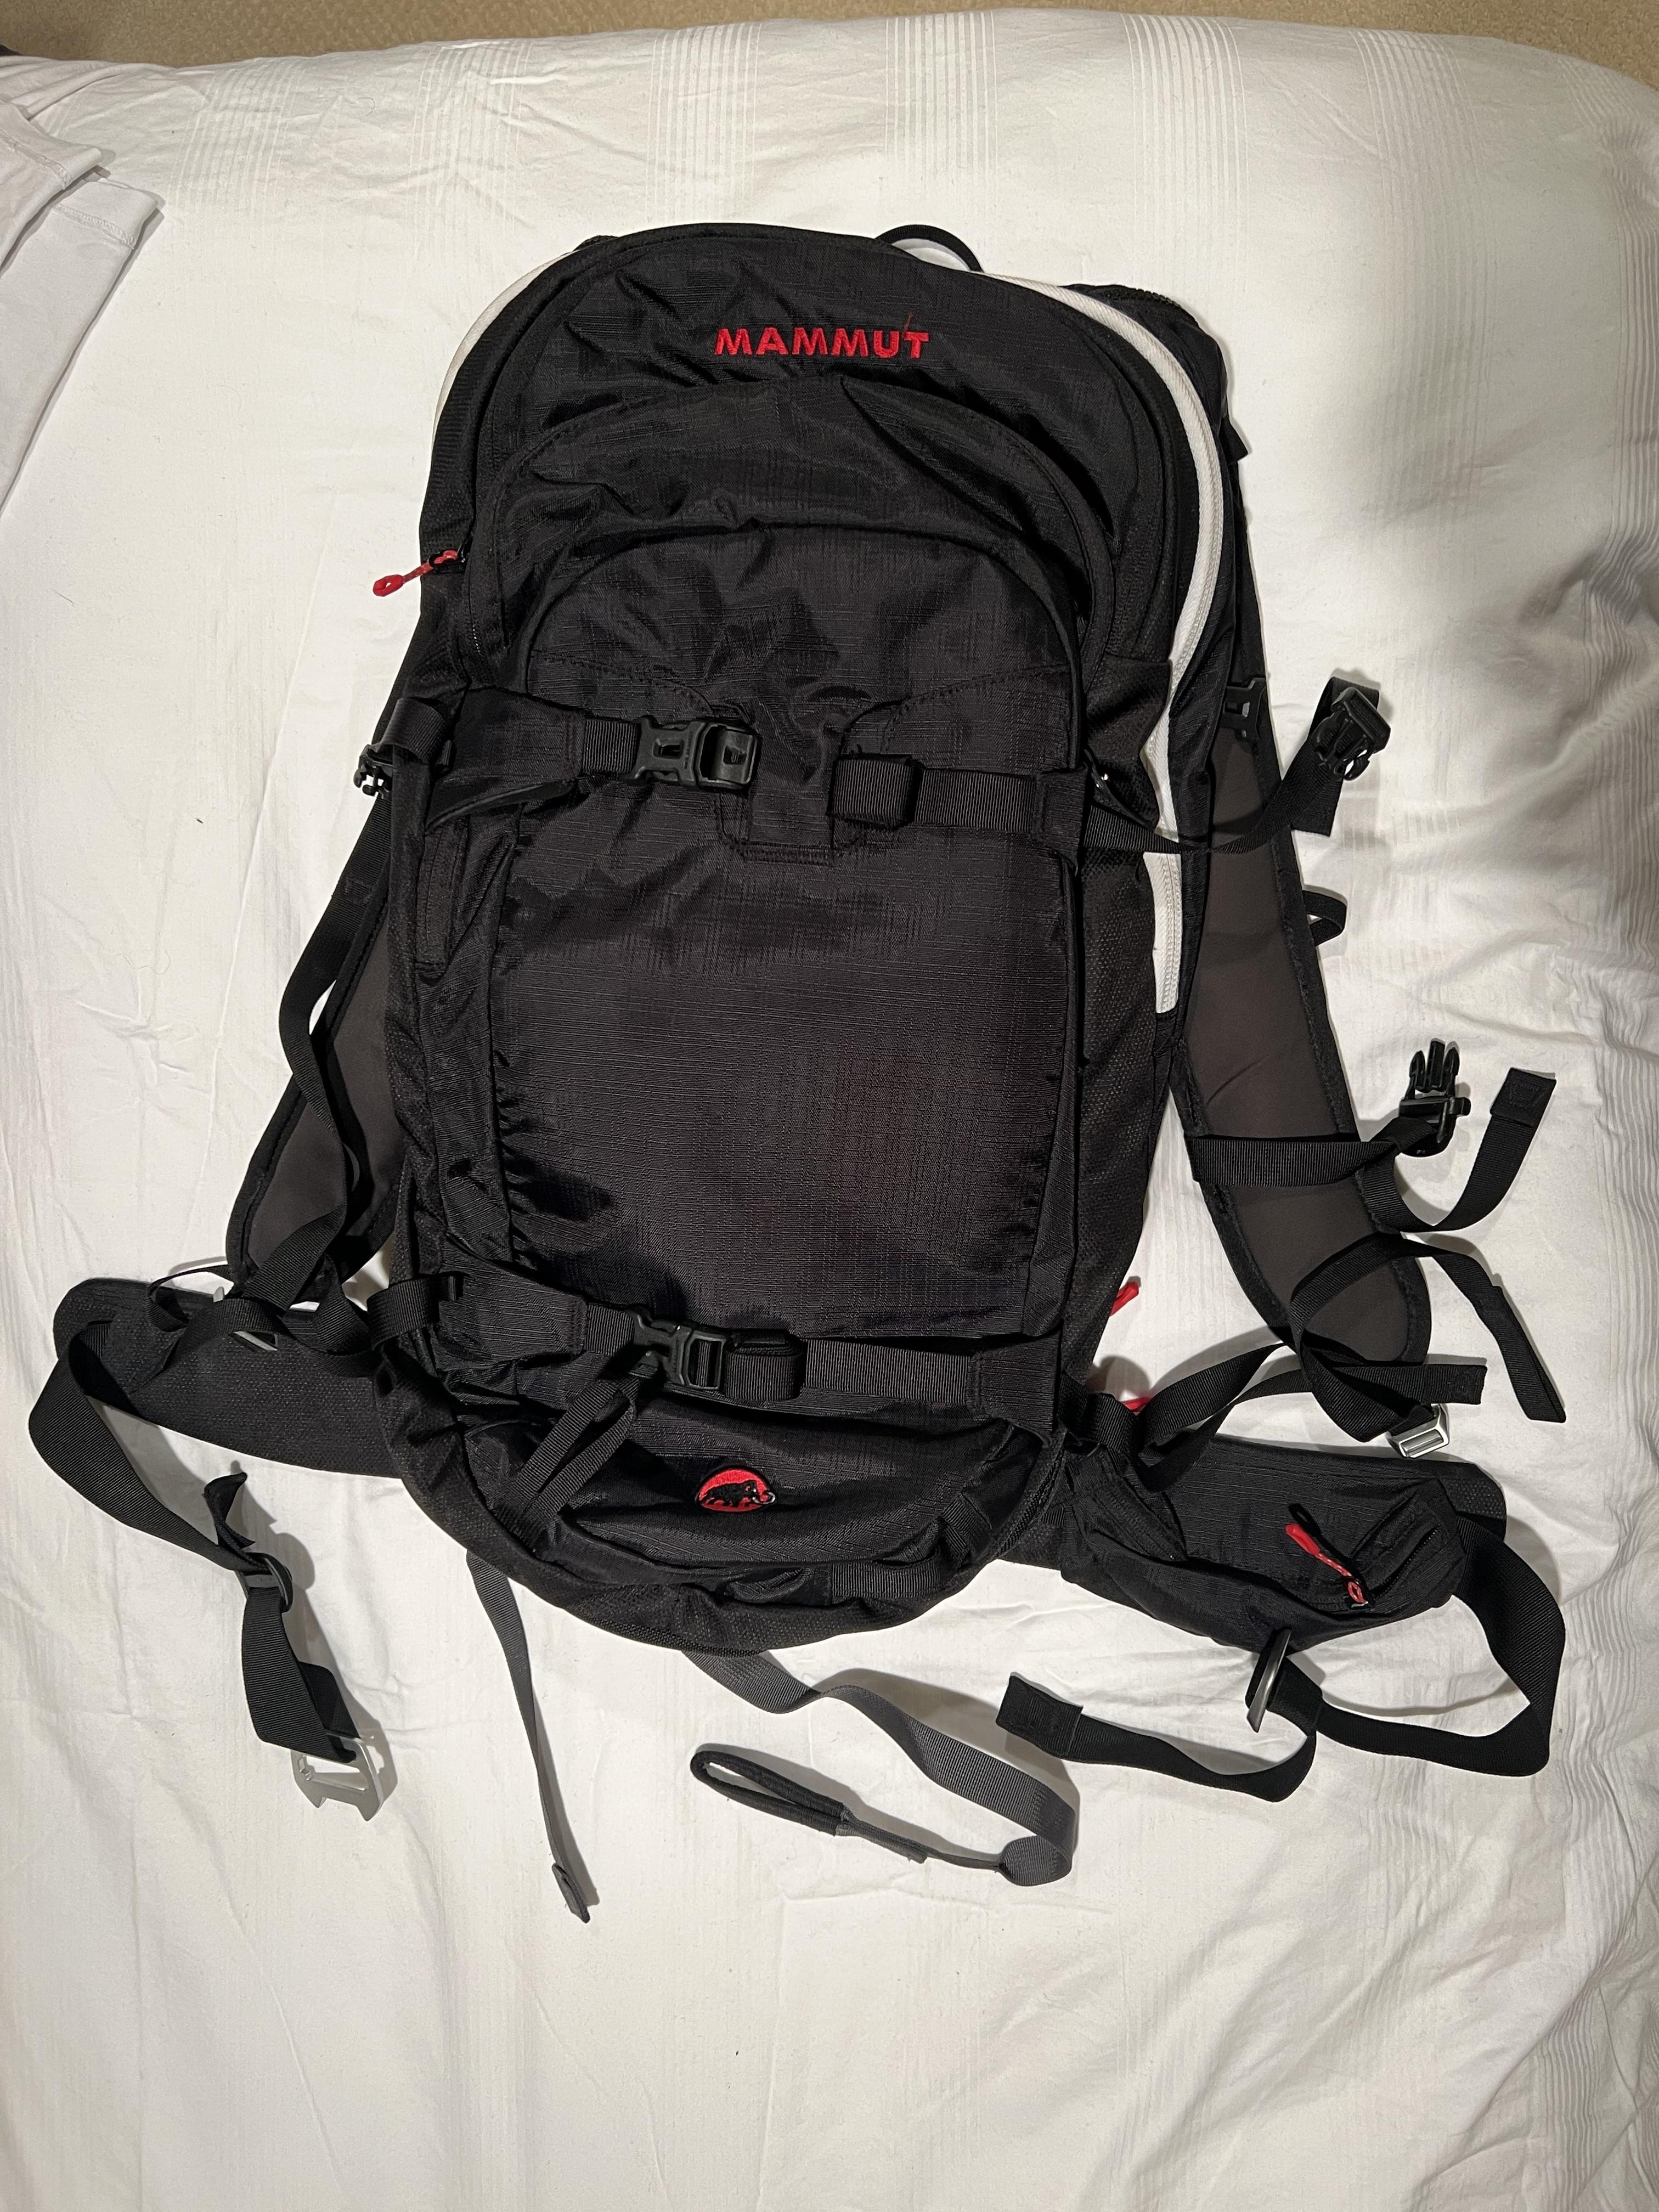 Mammut AirBag Technology 3.0 Avalanche Backpack